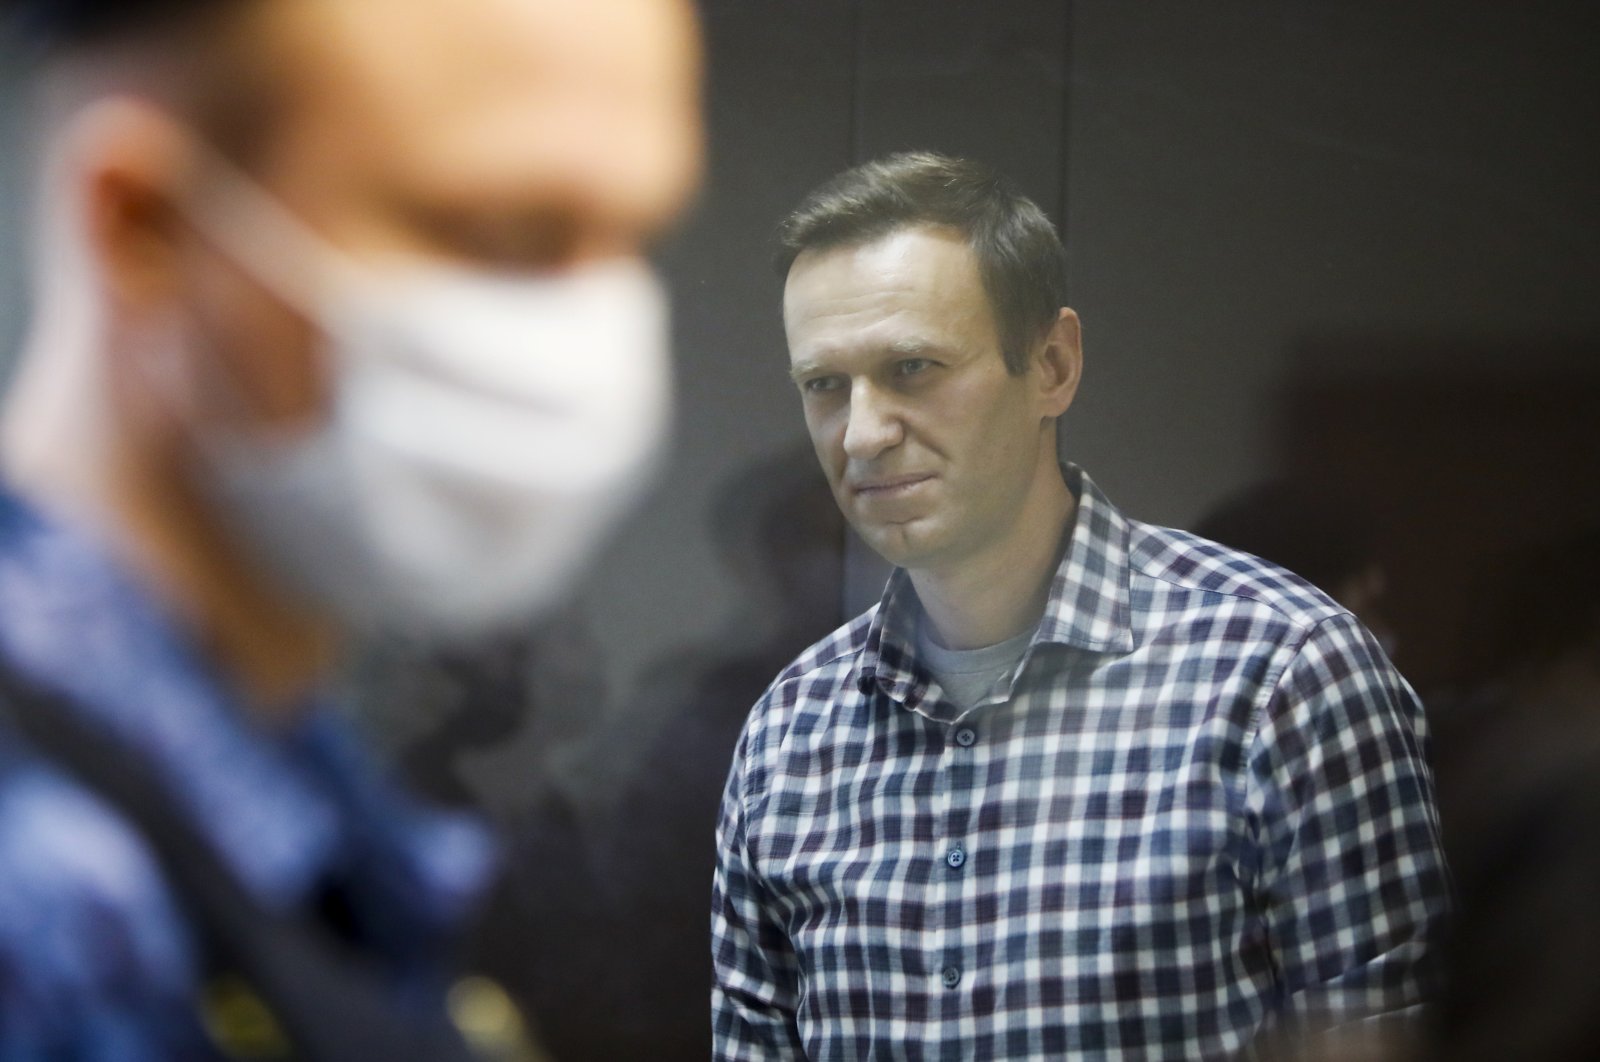 Russian opposition politician Alexei Navalny attends a hearing in Moscow, Russia, Feb. 20, 2021. (Reuters Photo)